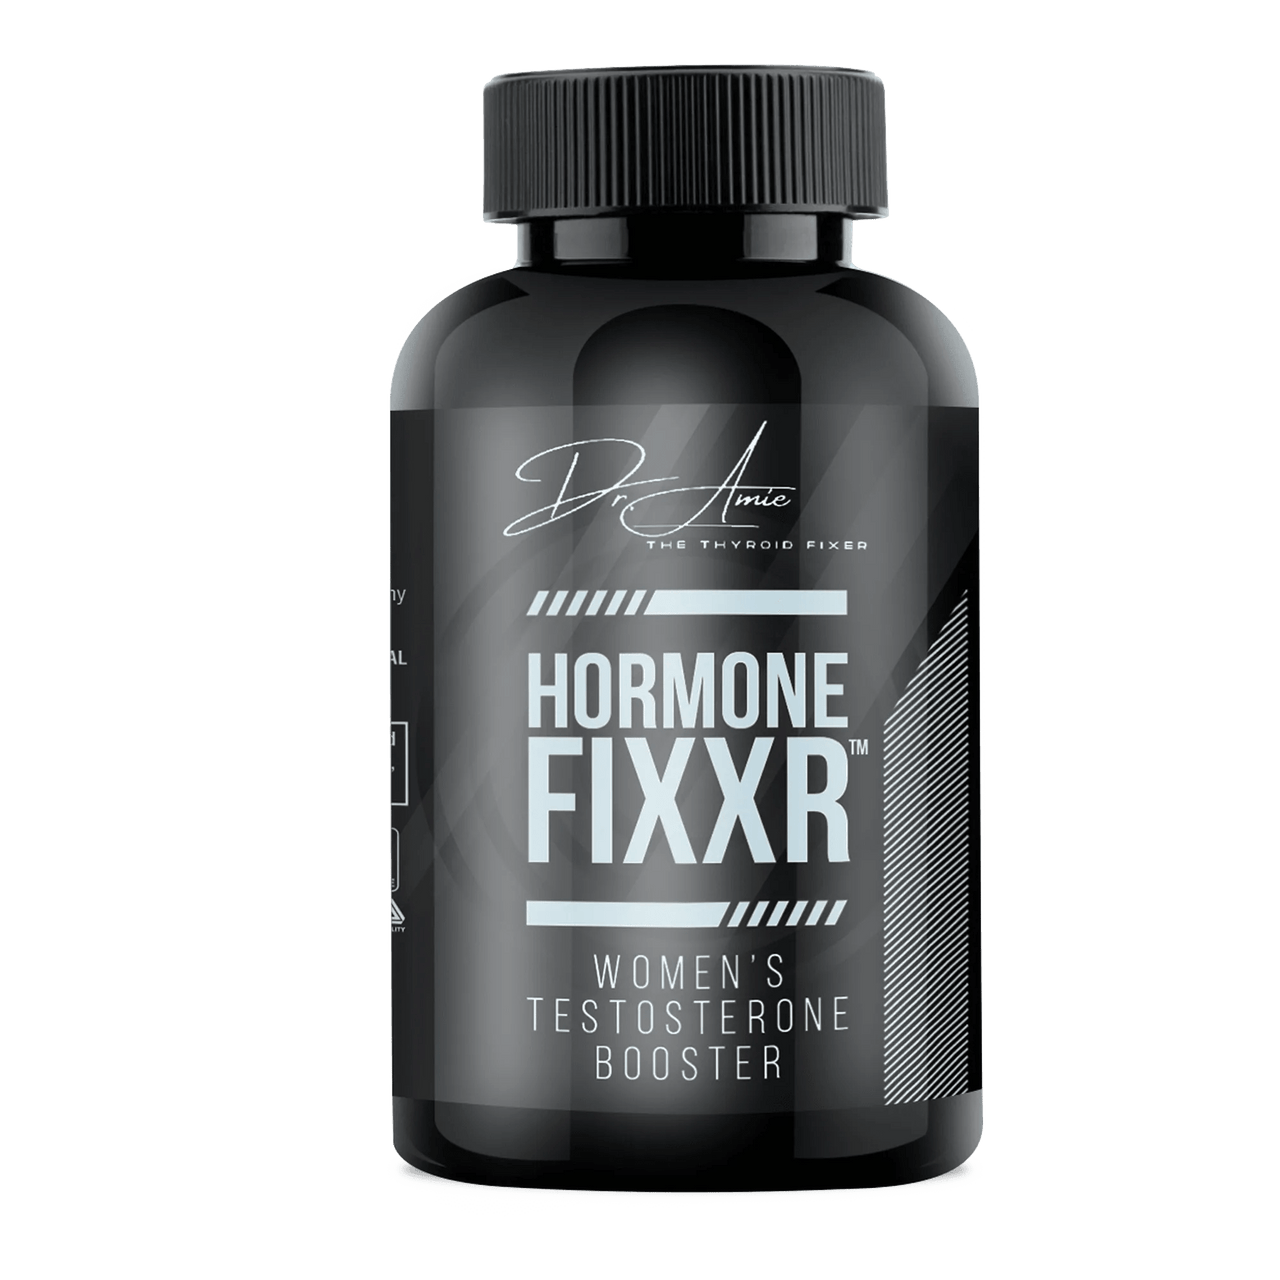 Hormone Fixxr - Accelerated Health Products